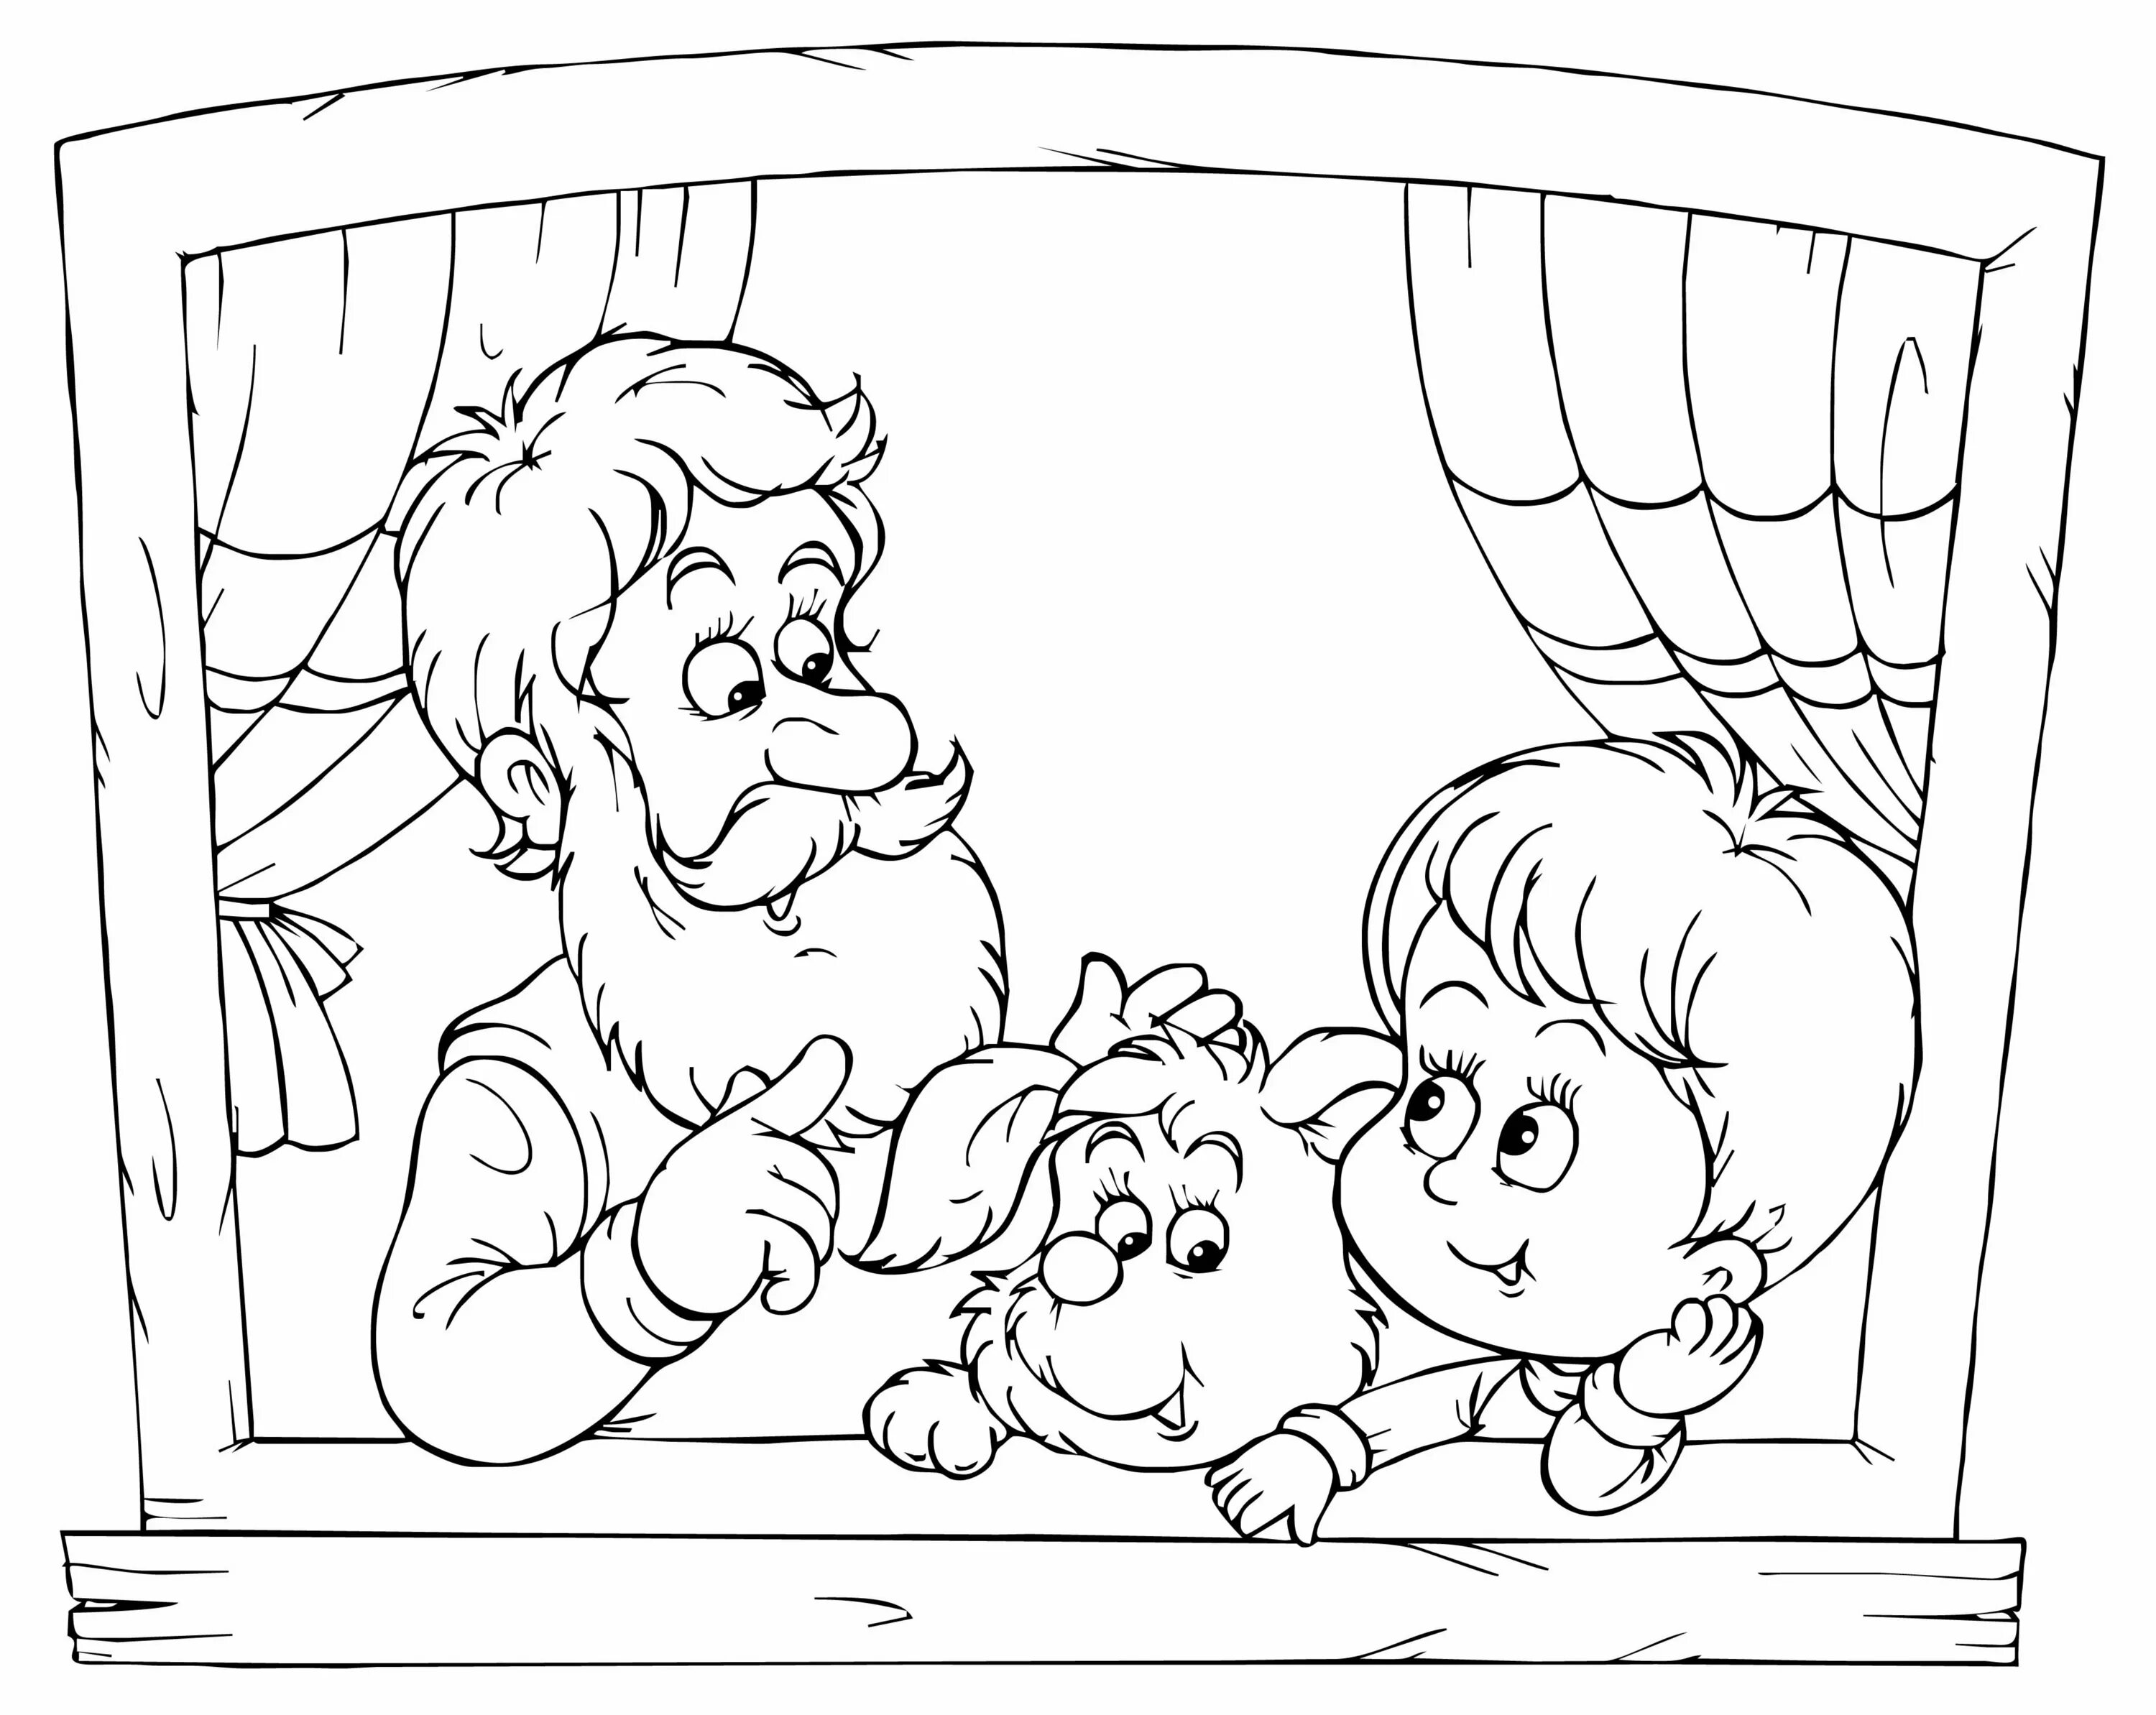 Glorious grandfather coloring pages for kids